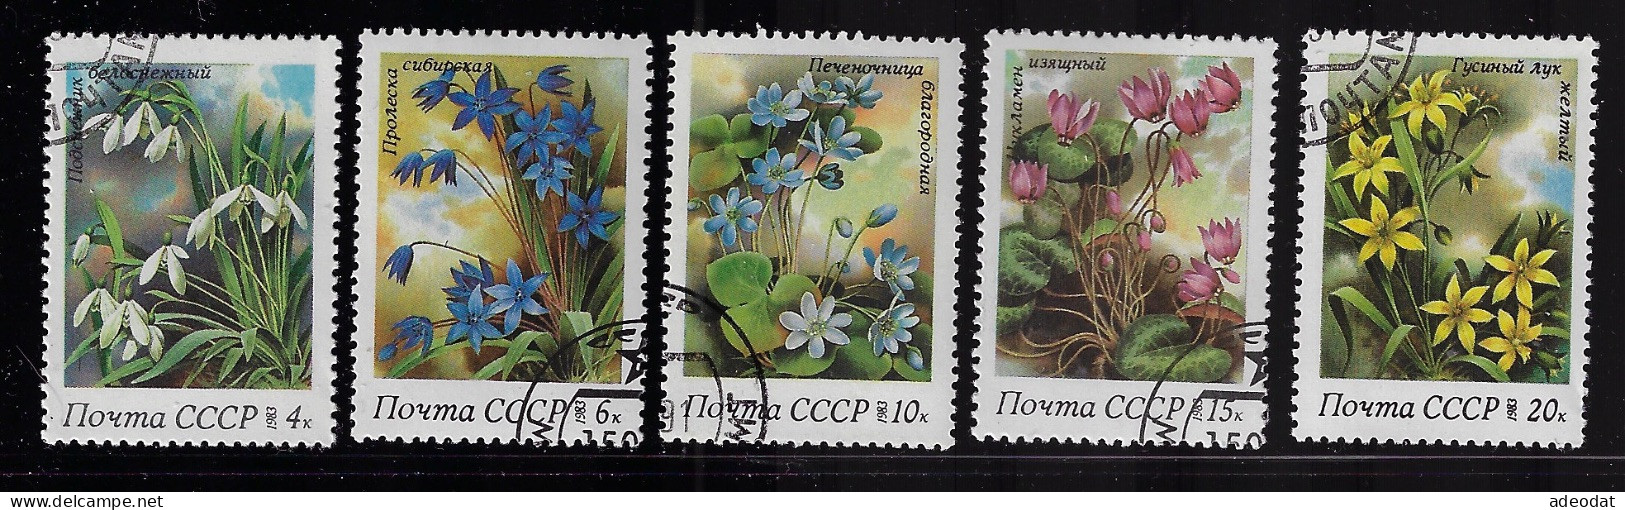 RUSSIA 1983  SCOTT #5148-5152  USED - Used Stamps